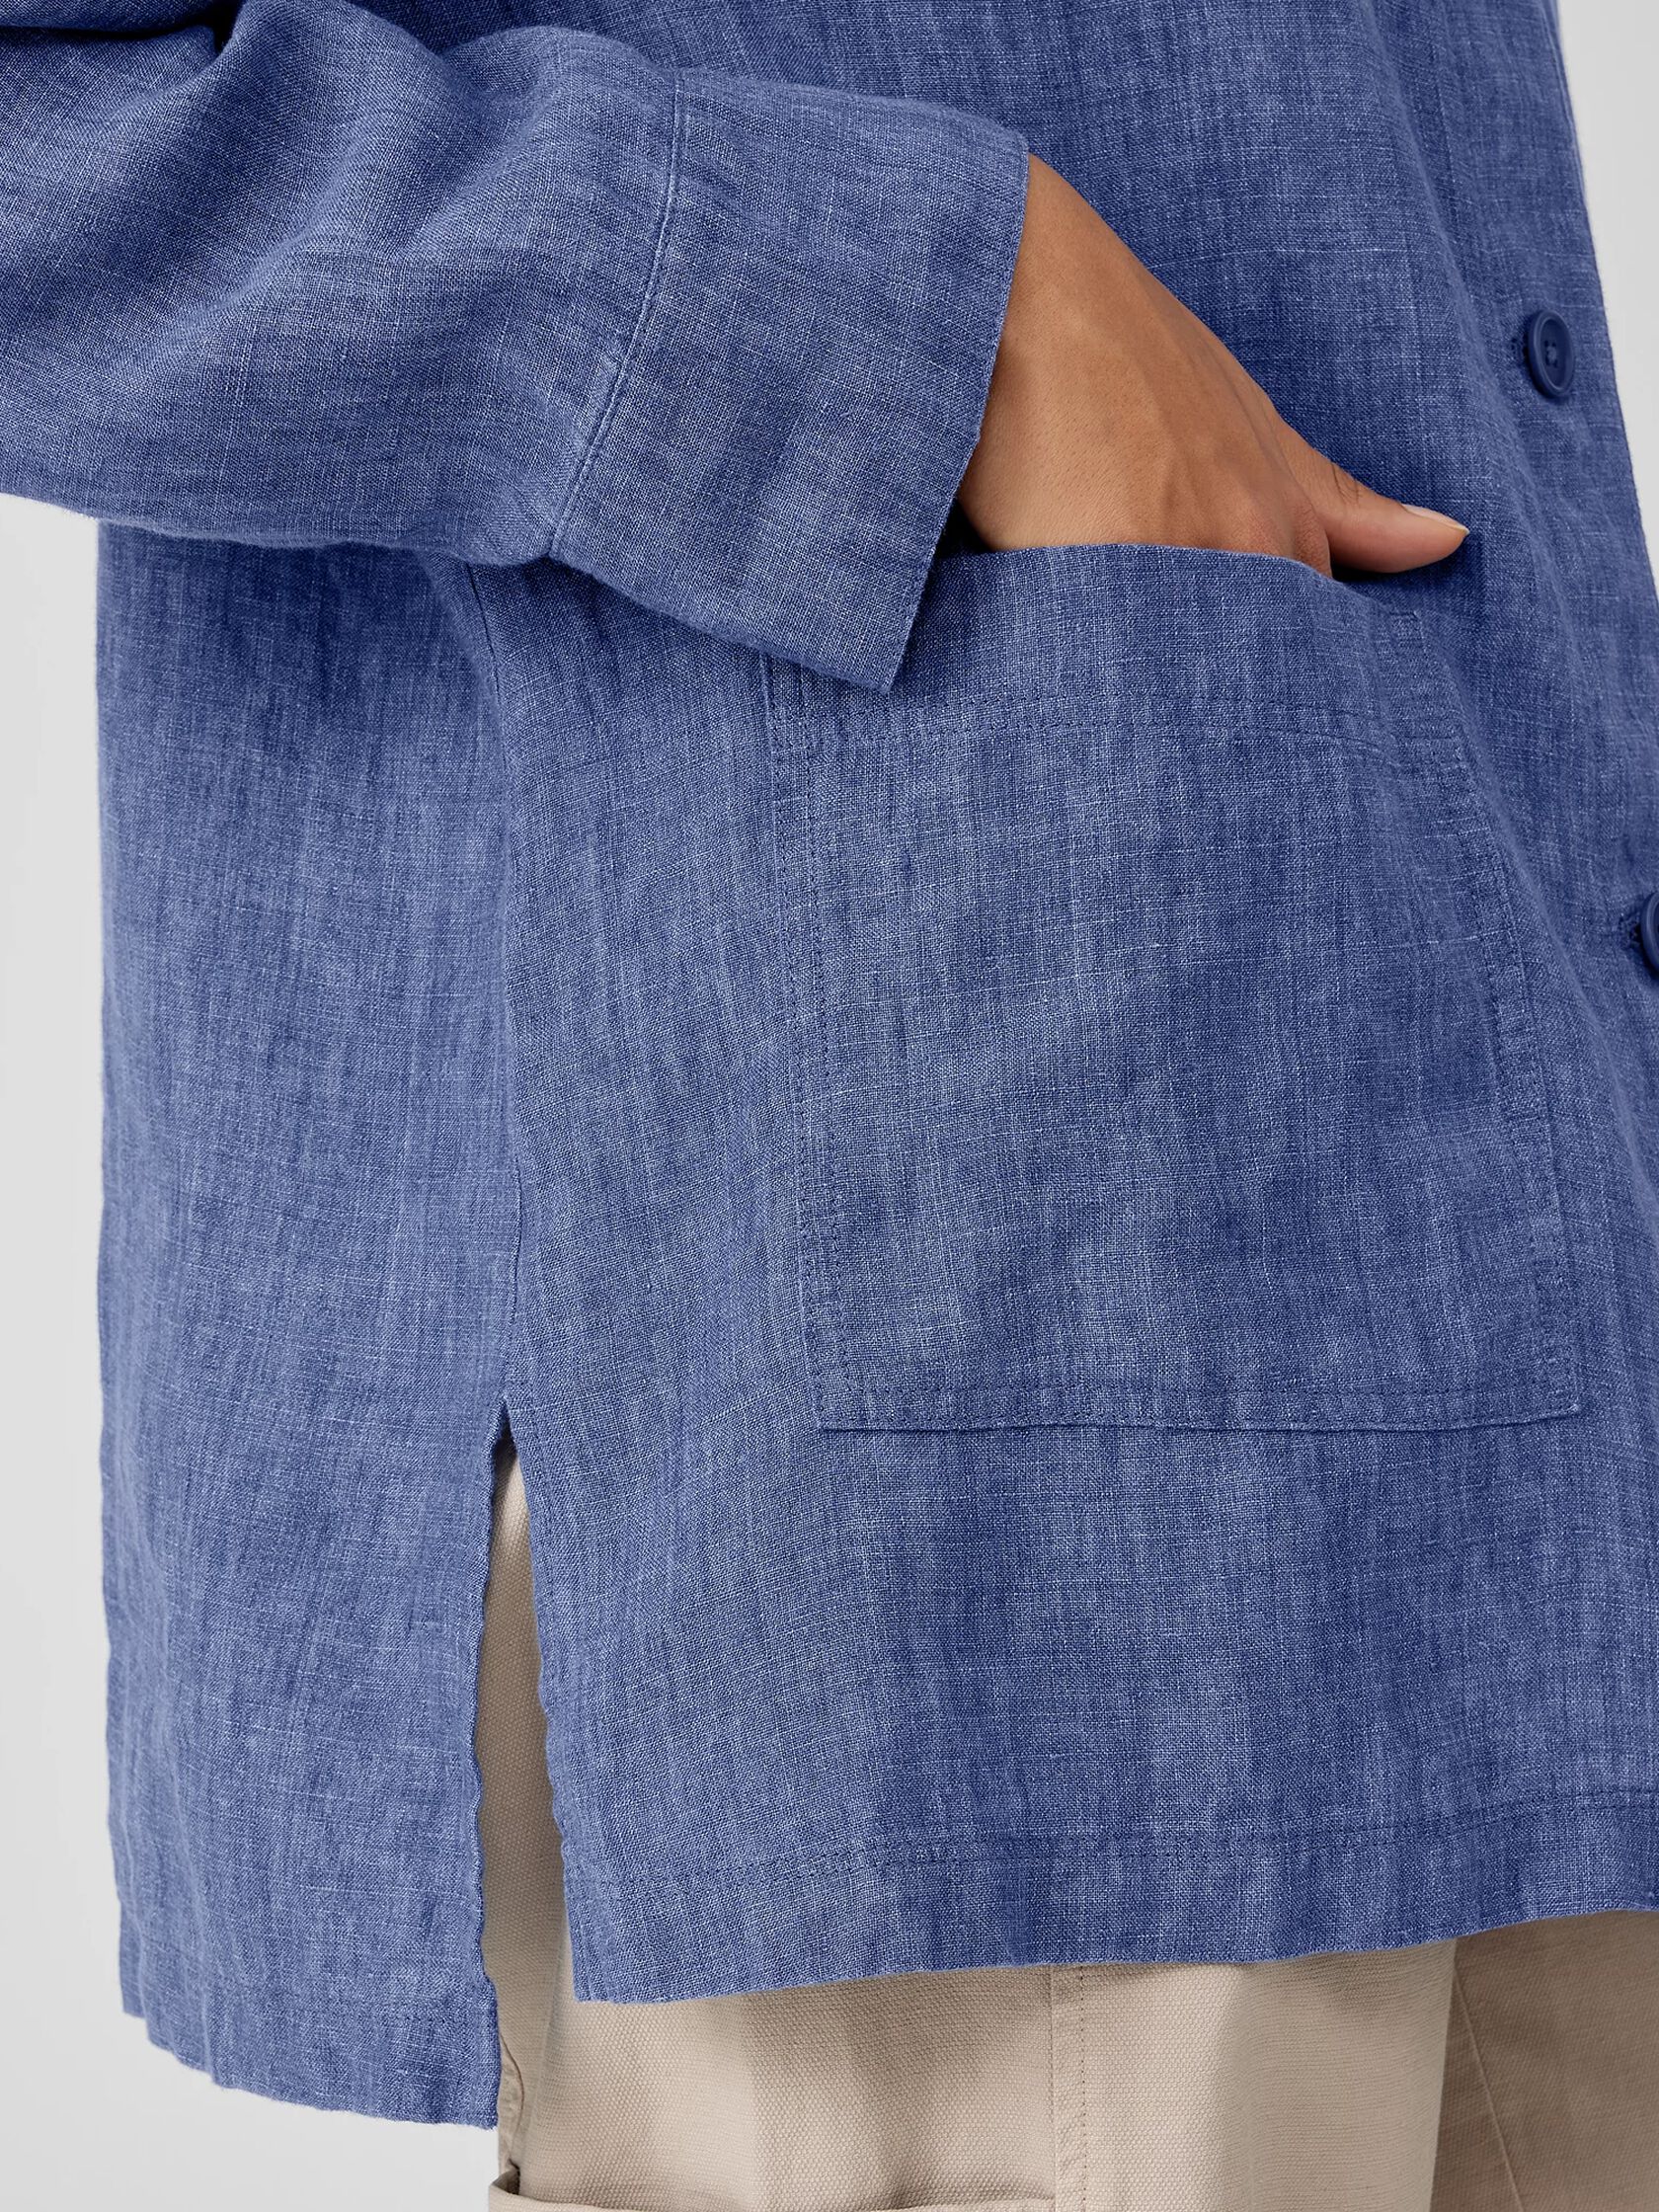 Washed Organic Linen Delave Stand Collar Jacket